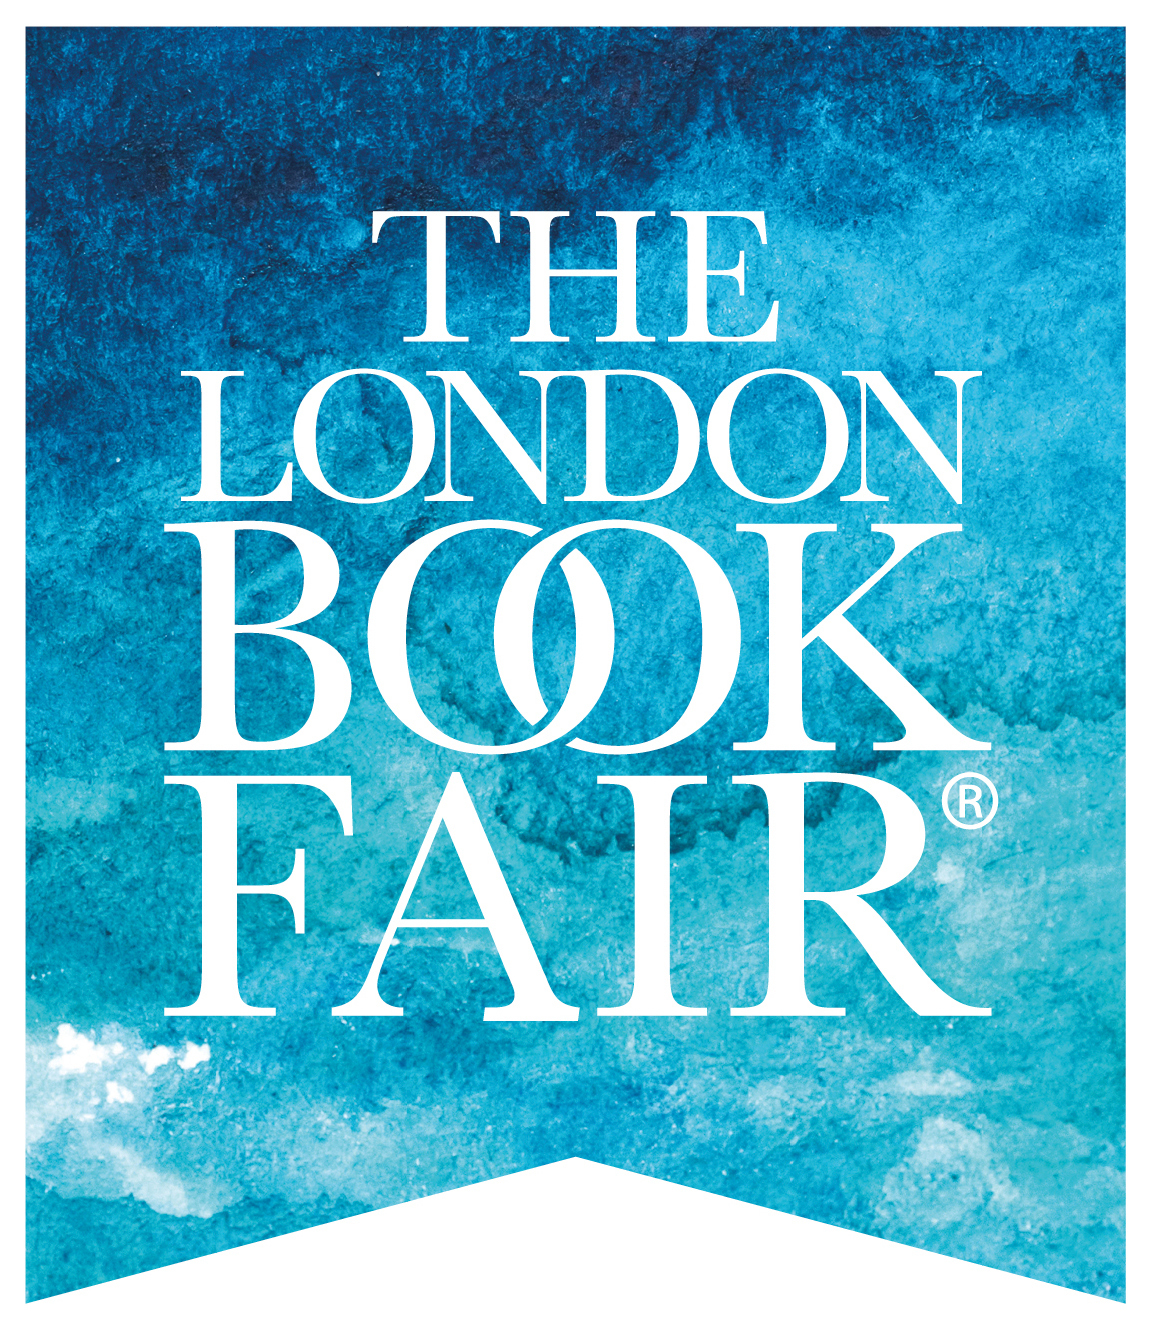 Outskirts Press helps self-publishing and indie authors feature their book at the London Book Fair.